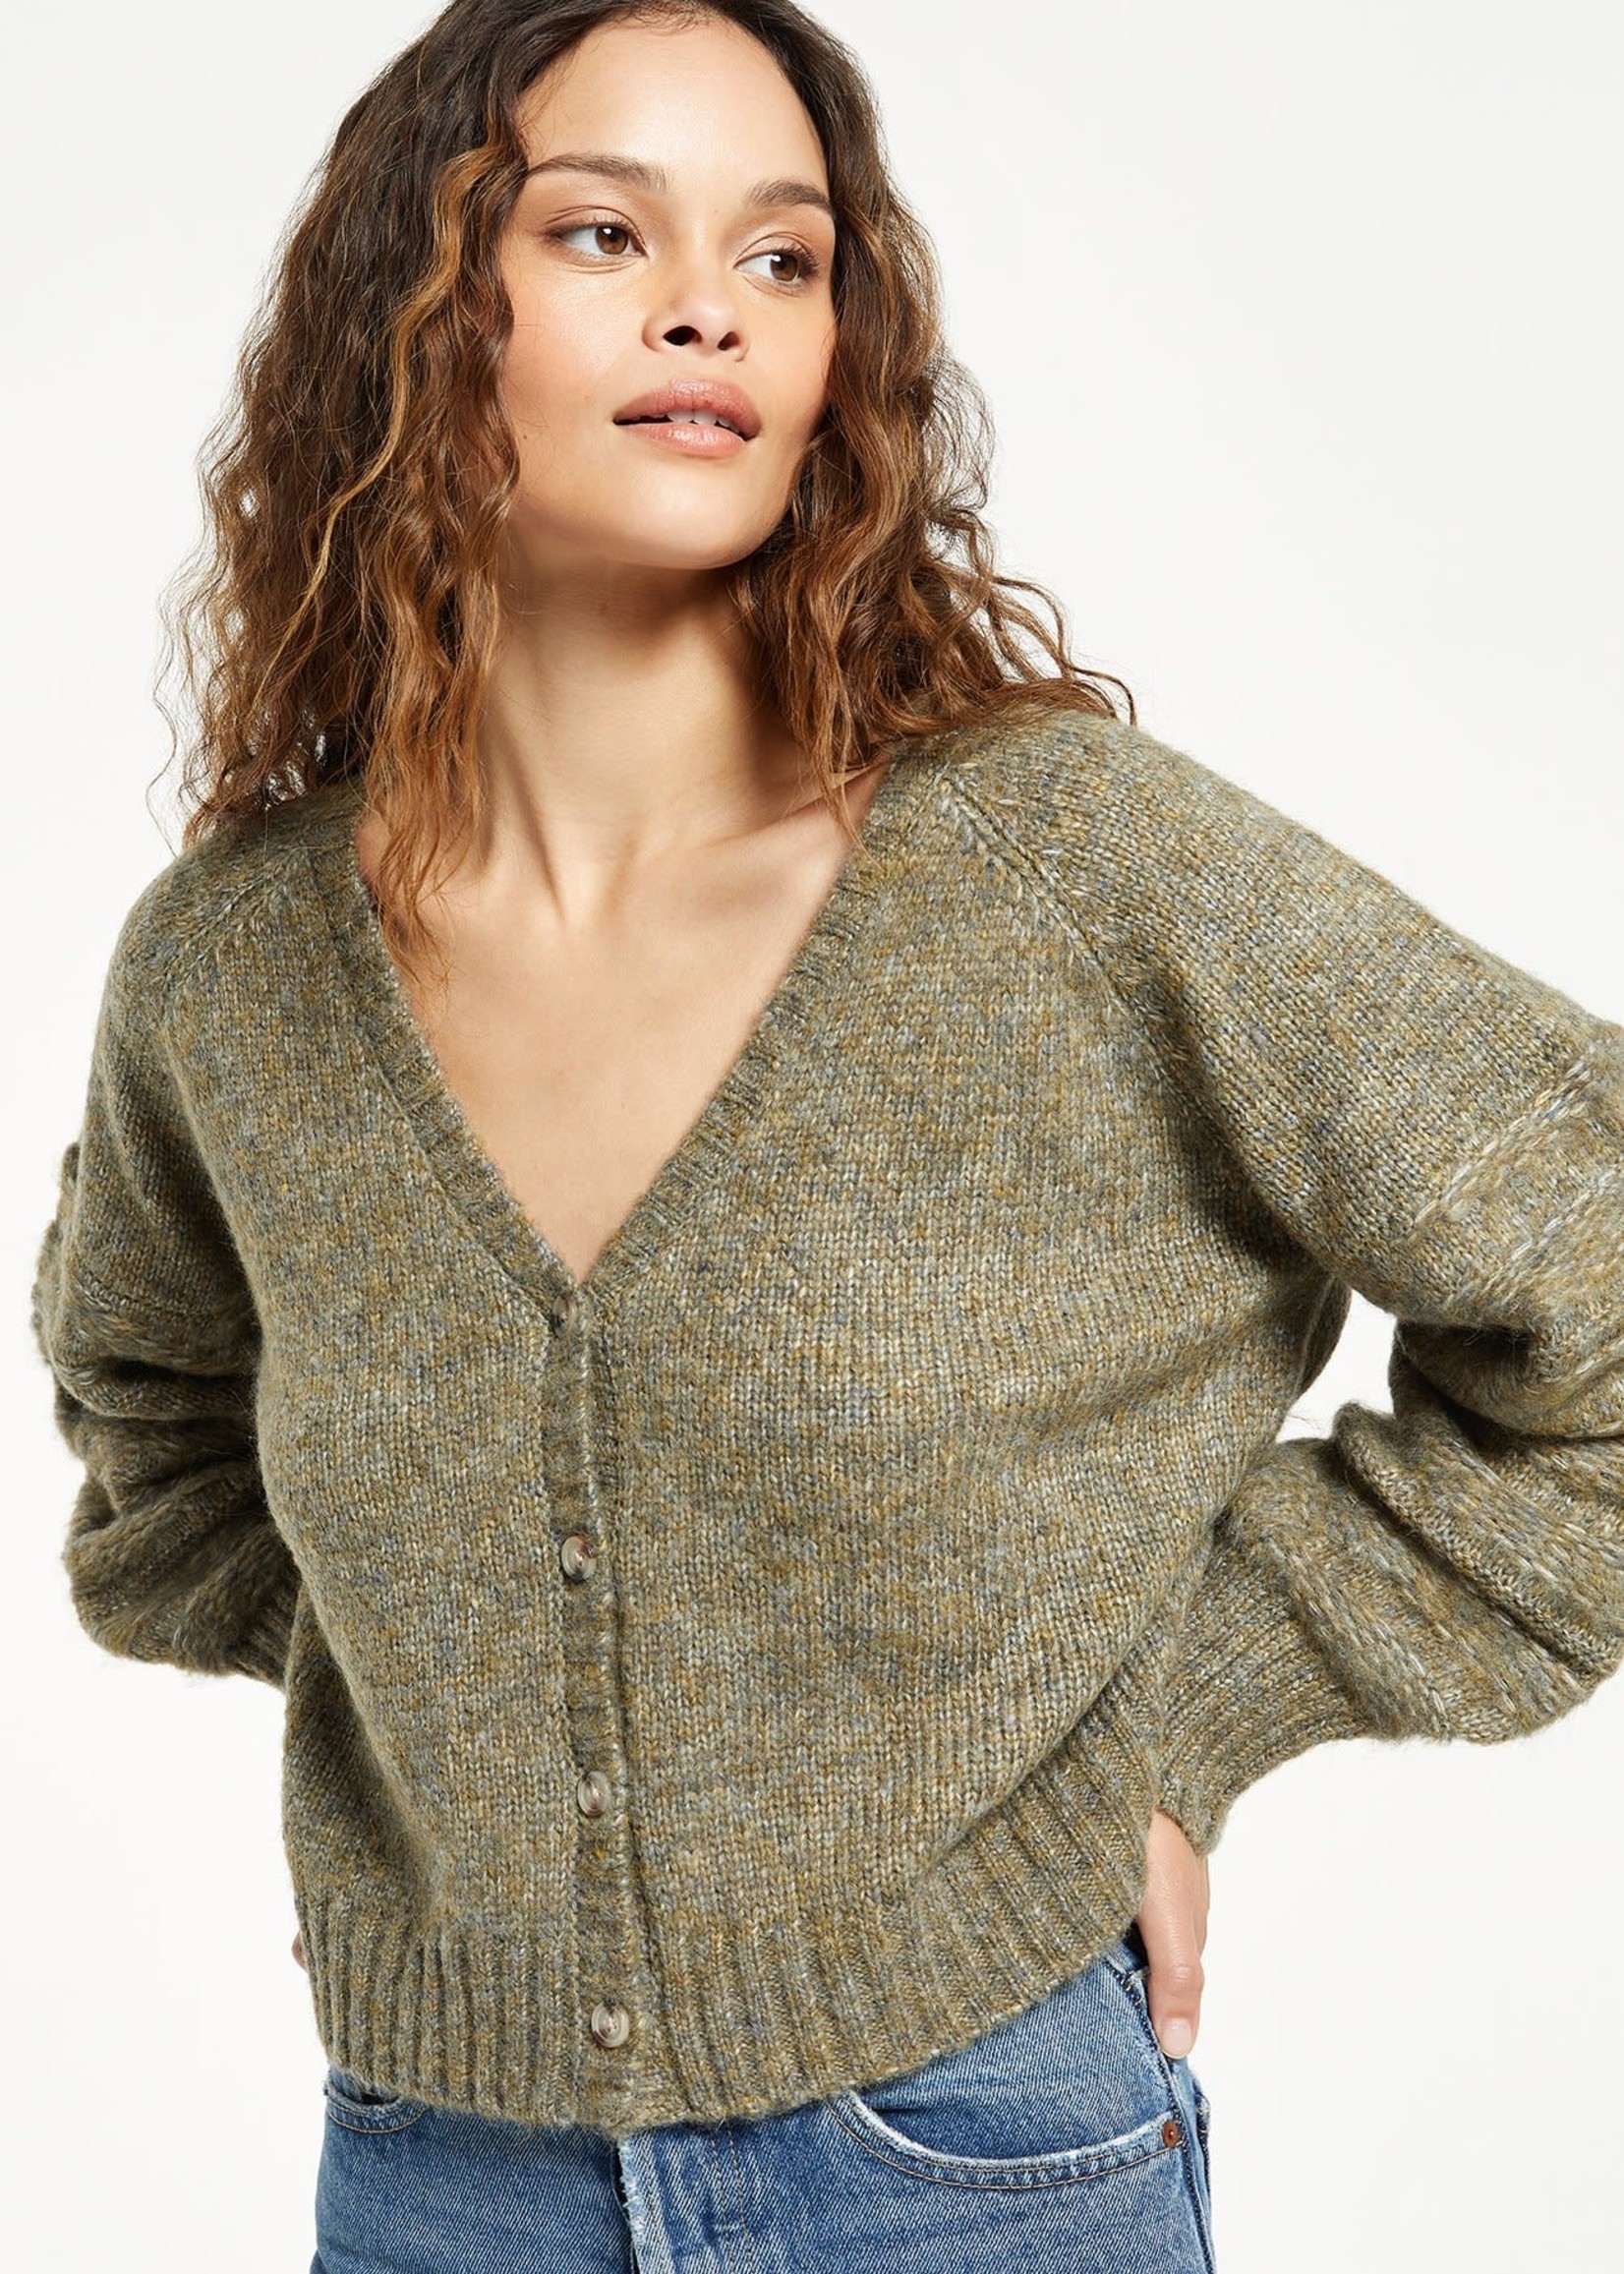 Z supply Essex cable sweater